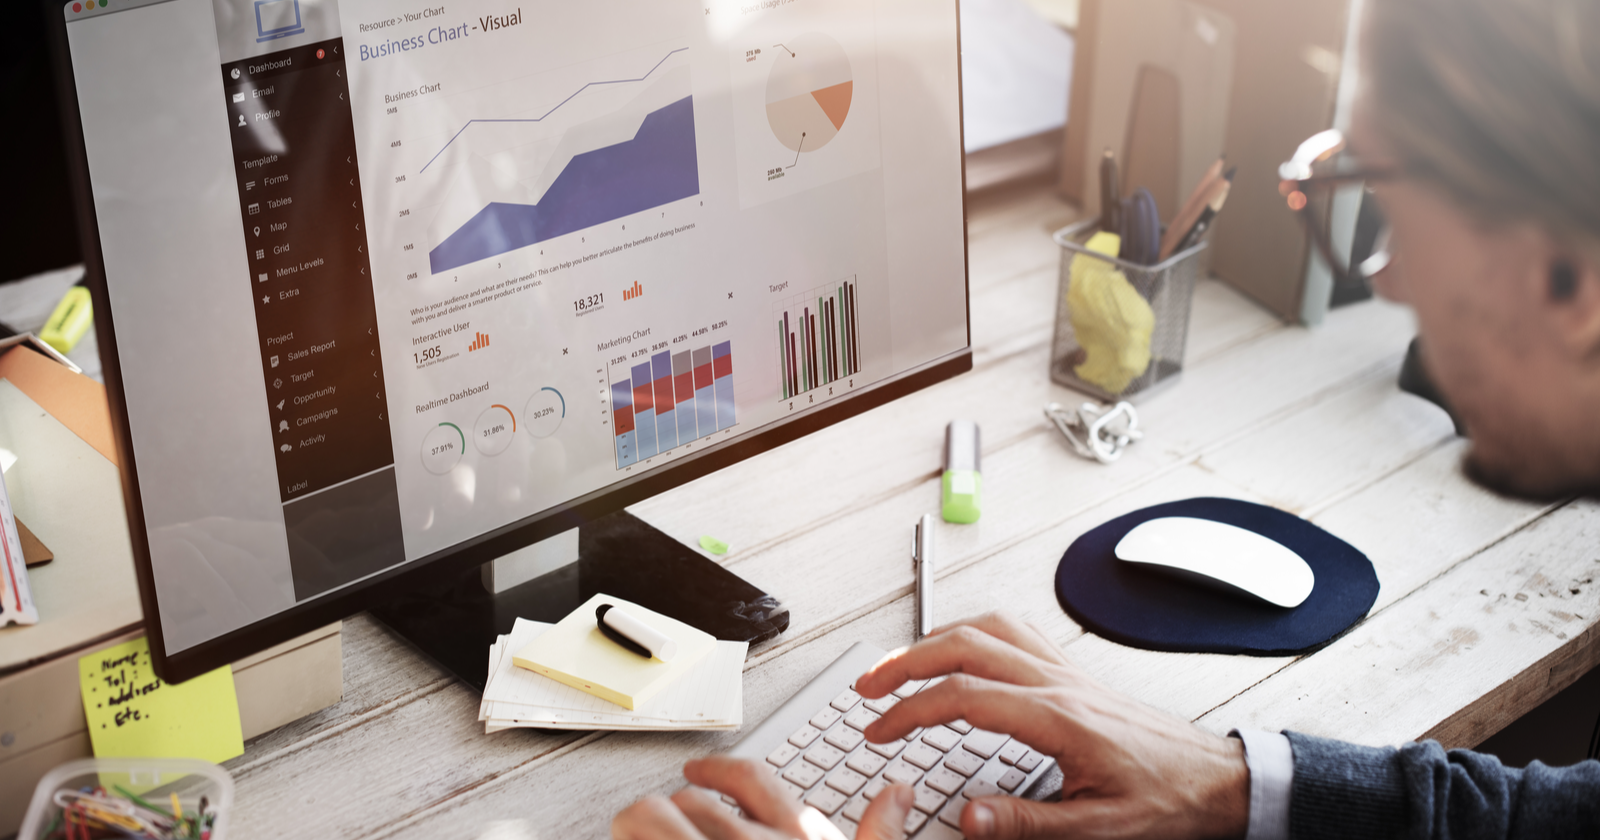 Shopify Analytics: 5 Hidden Gems To Help Scale Your Revenue Growth via @sejournal, @shuey03